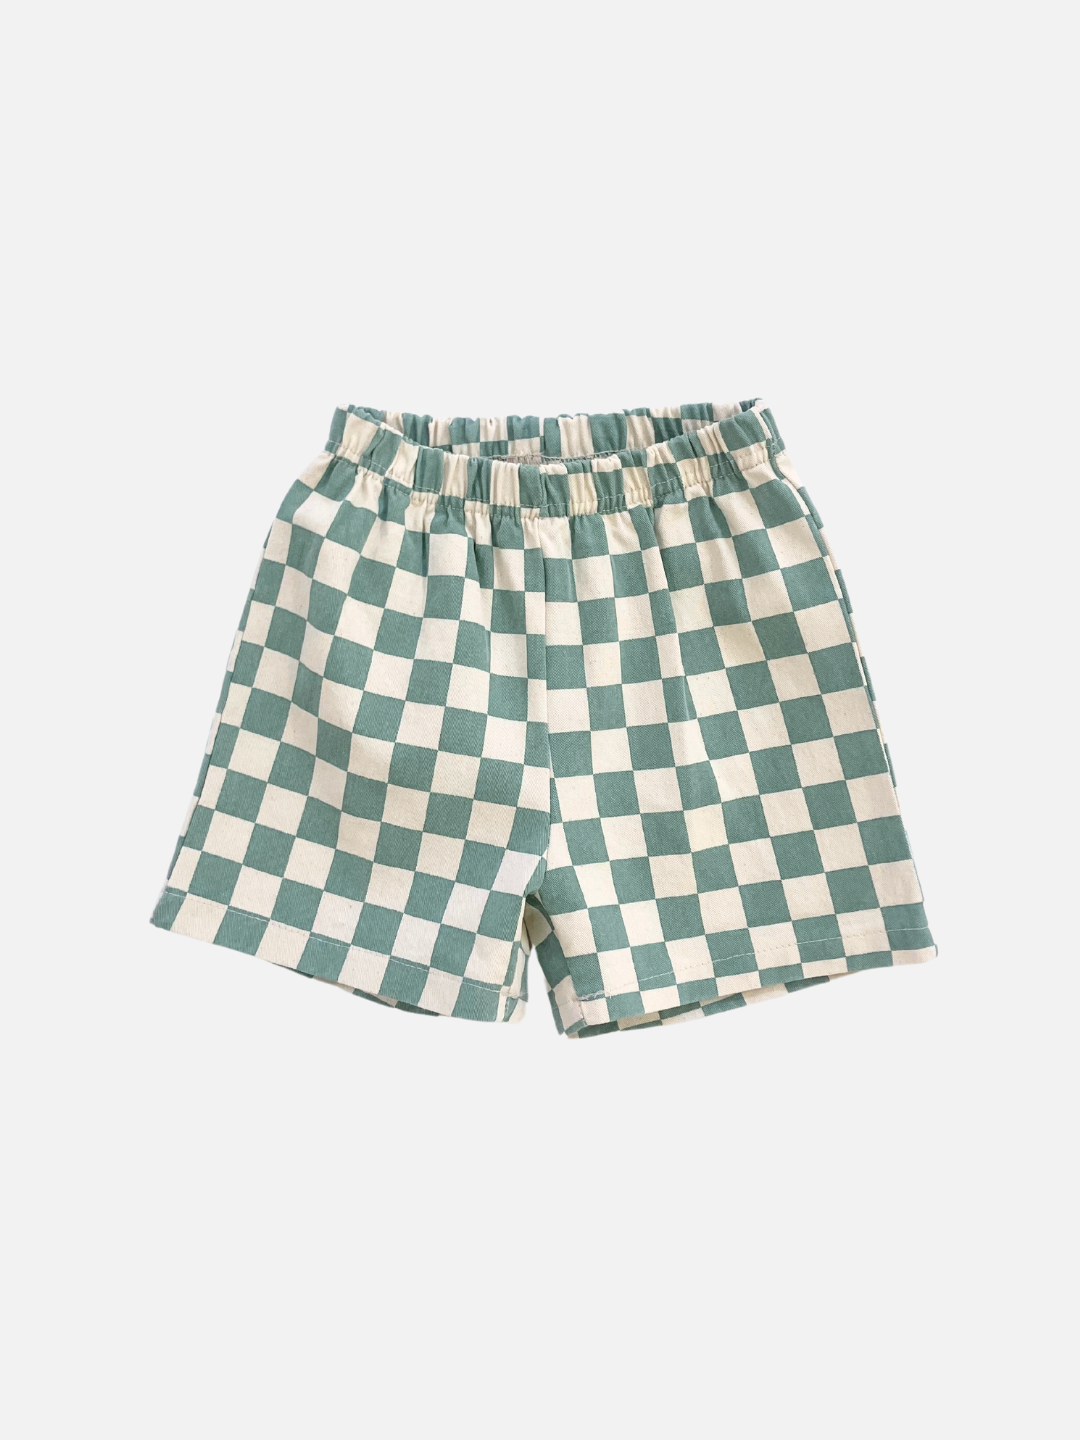 Teal | A front view of the kid's Frankie Short in Teal & Ivory check